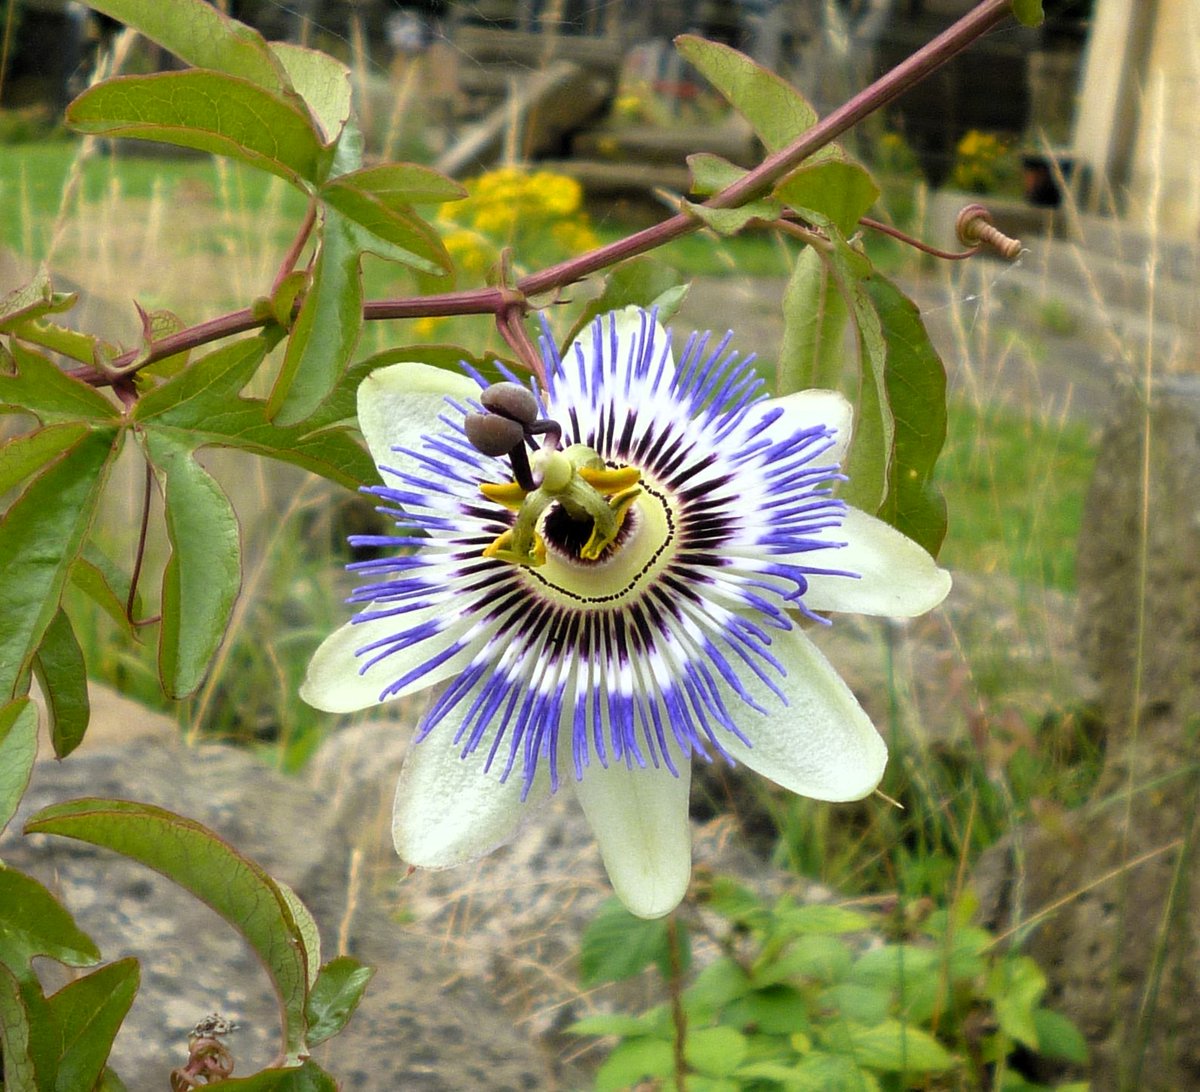 #AlphabetChallenge #WeekP P for passion flower. Passion flower in bloom at Lister Lane Cemetery - summer 2023